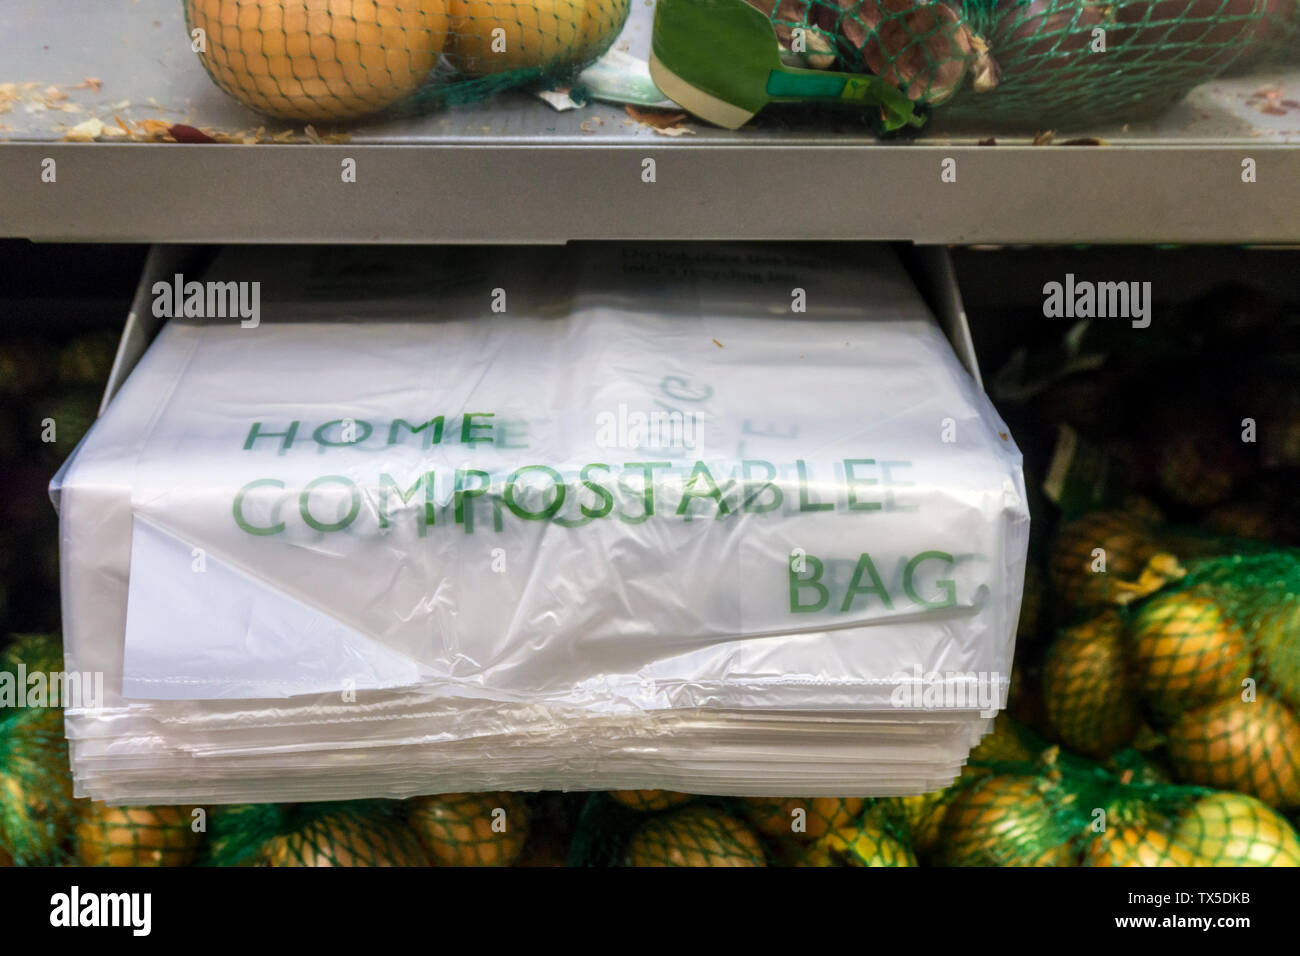 Waitrose supermarkets are replacing the loose plastic bags in their fruit and vegetable sections with compostable bags that can be used as liners for food waste caddies or put in home compost bins.  They expect this to save the use of 71m plastic bags a year. Stock Photo